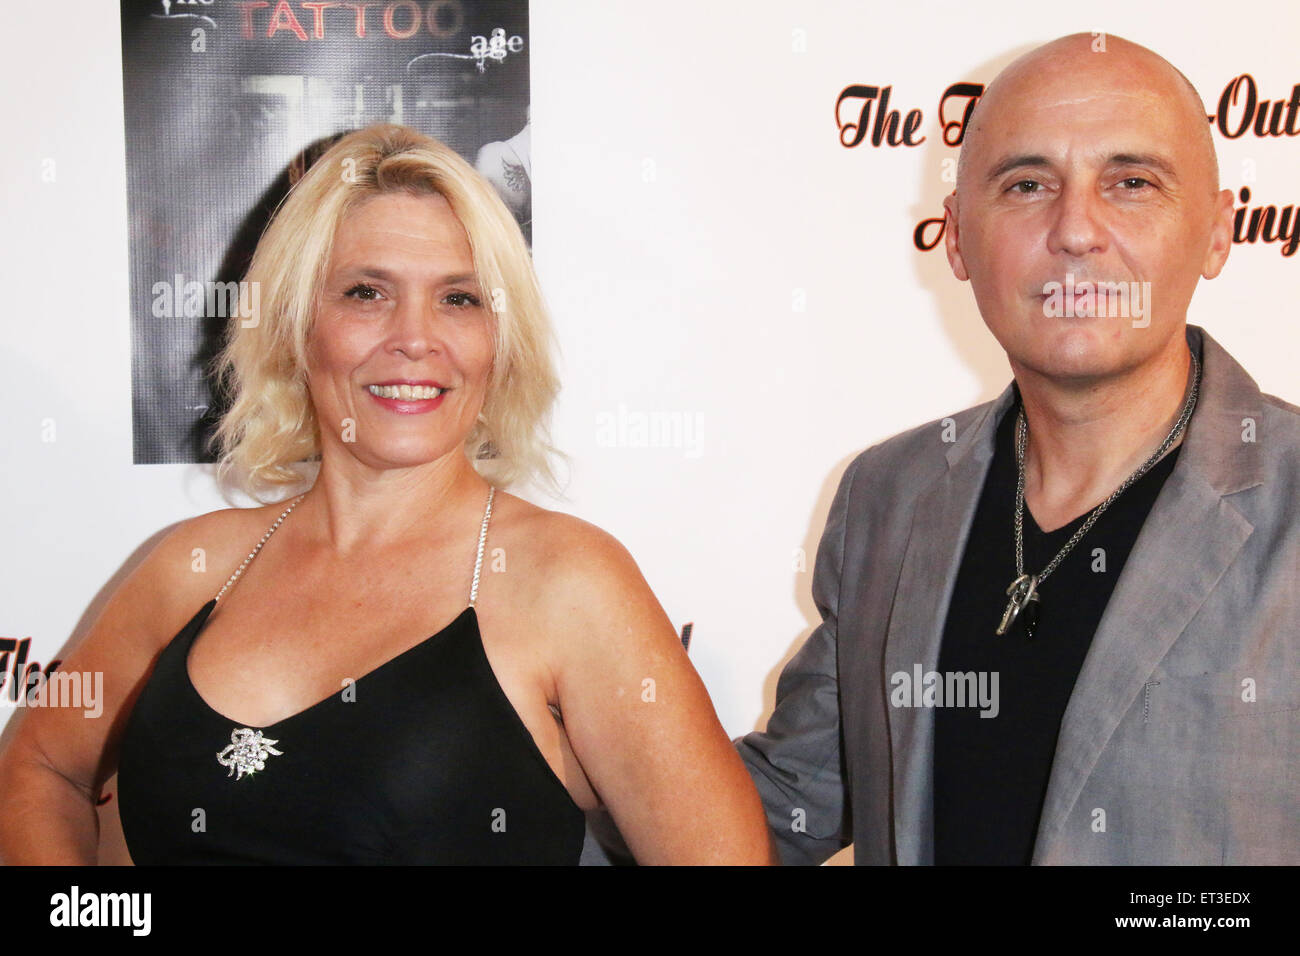 'The Tattoo Age – Out of Control' documentary film release at the Vaucluse Lodge  Featuring: Calista Carradine,Tamas Birinyi Where: West Hollywood, California, United States When: 04 Dec 2014 Credit: WENN.com Stock Photo